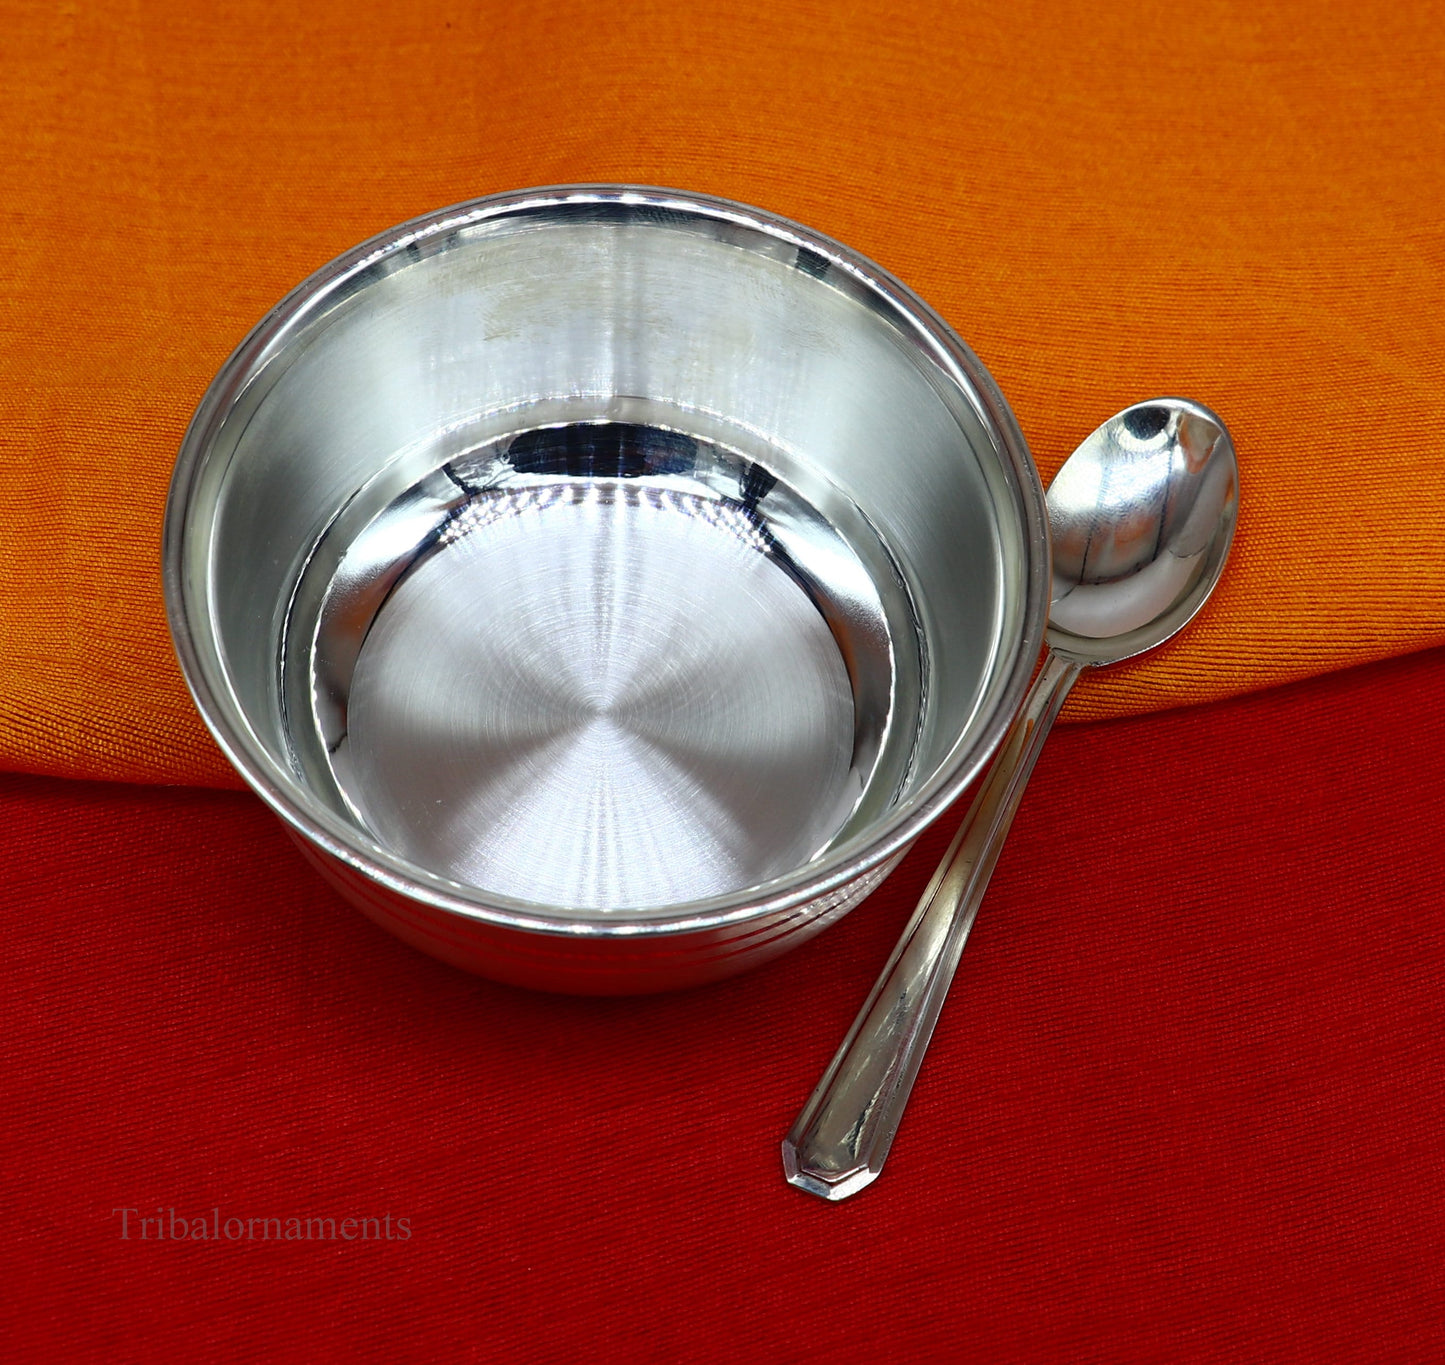 999 fine solid silver handmade small bowl for baby serving, pure silver vessel, silver utensils, home kitchen accessories puja bowl sv225 - TRIBAL ORNAMENTS